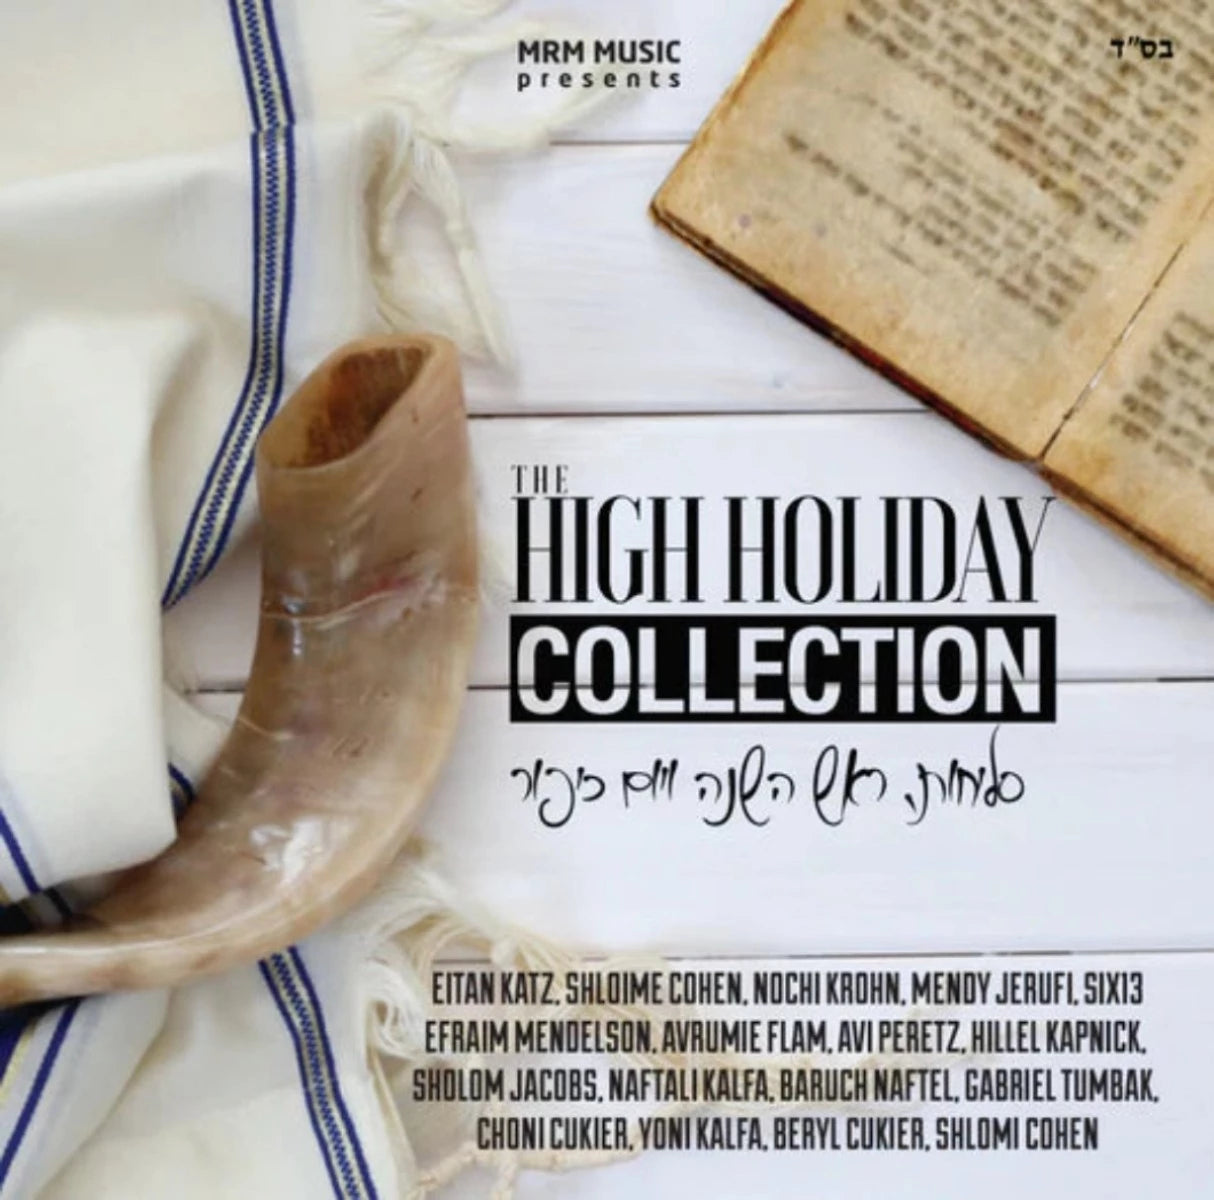 MRM Music - The High Holiday Collection